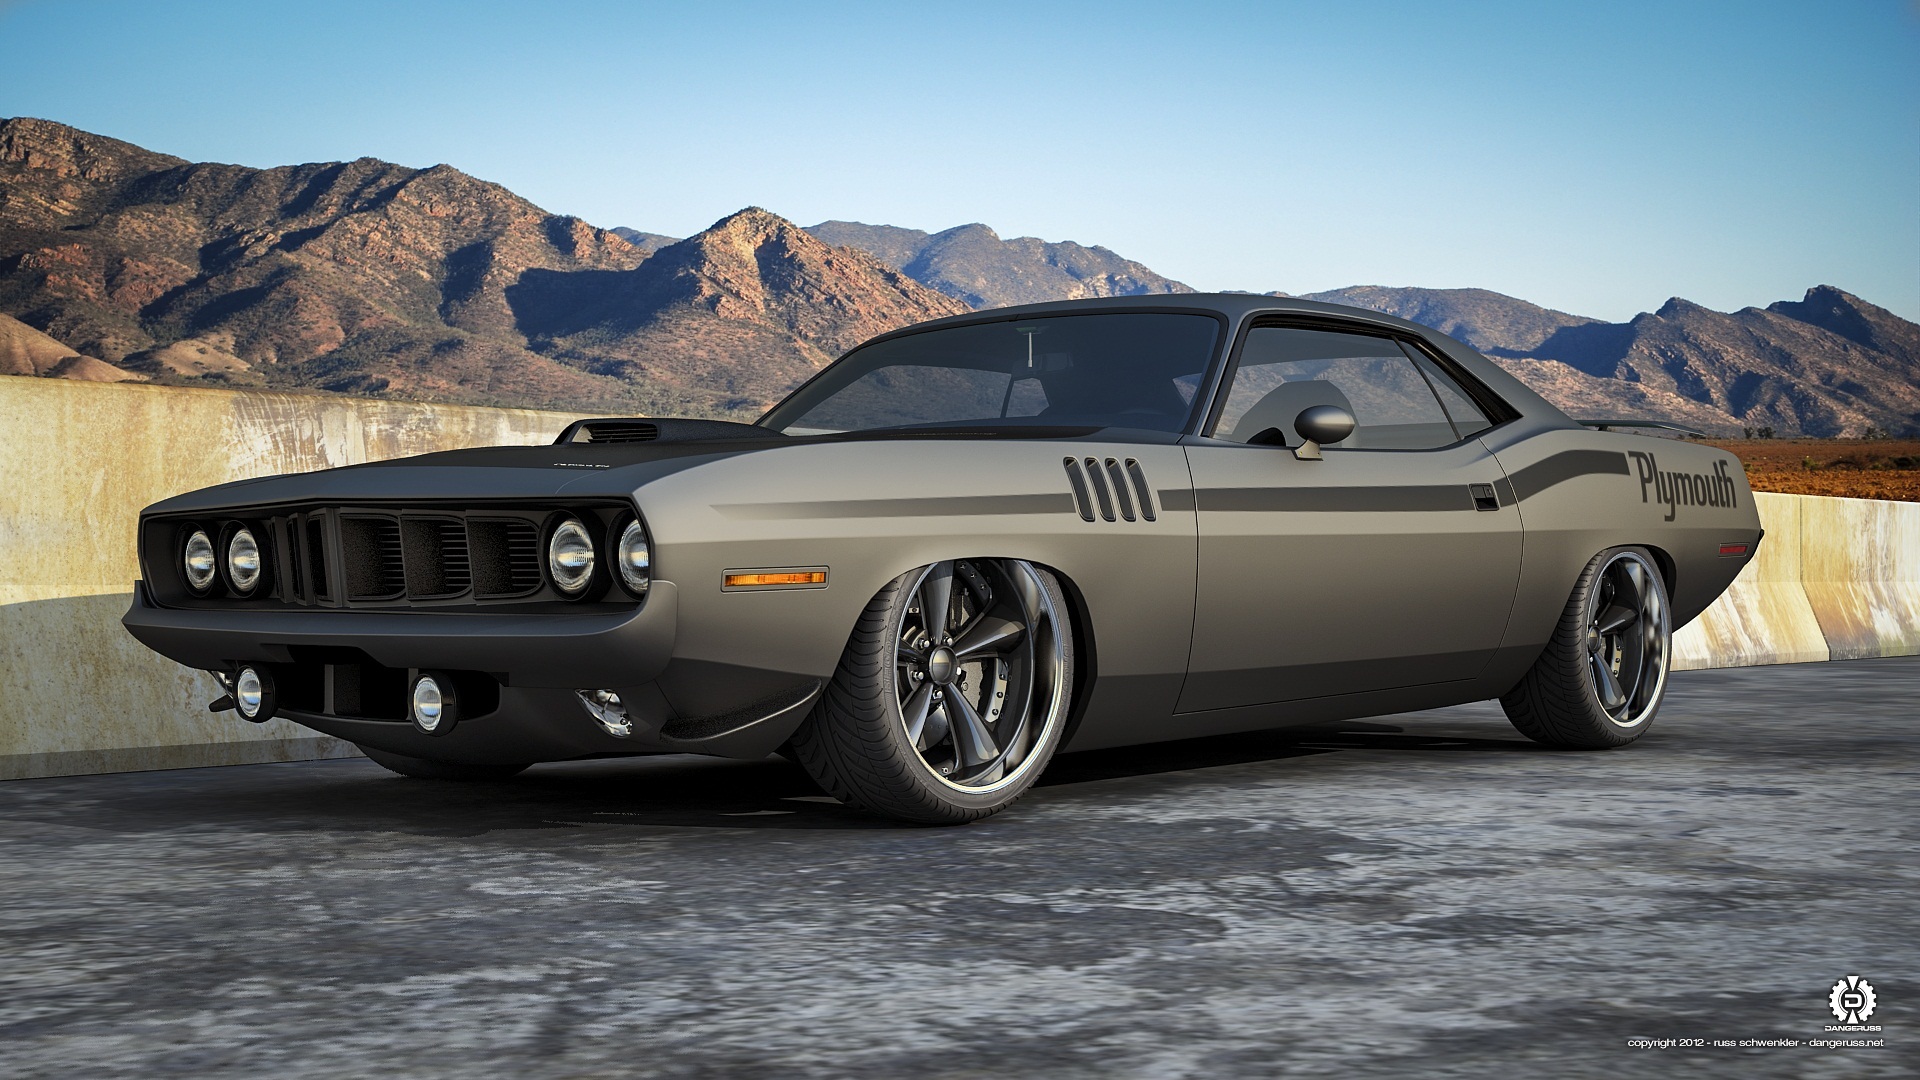 Muscle Car Full HD Pics Wallpapers 8407 - Amazing Wallpaperz